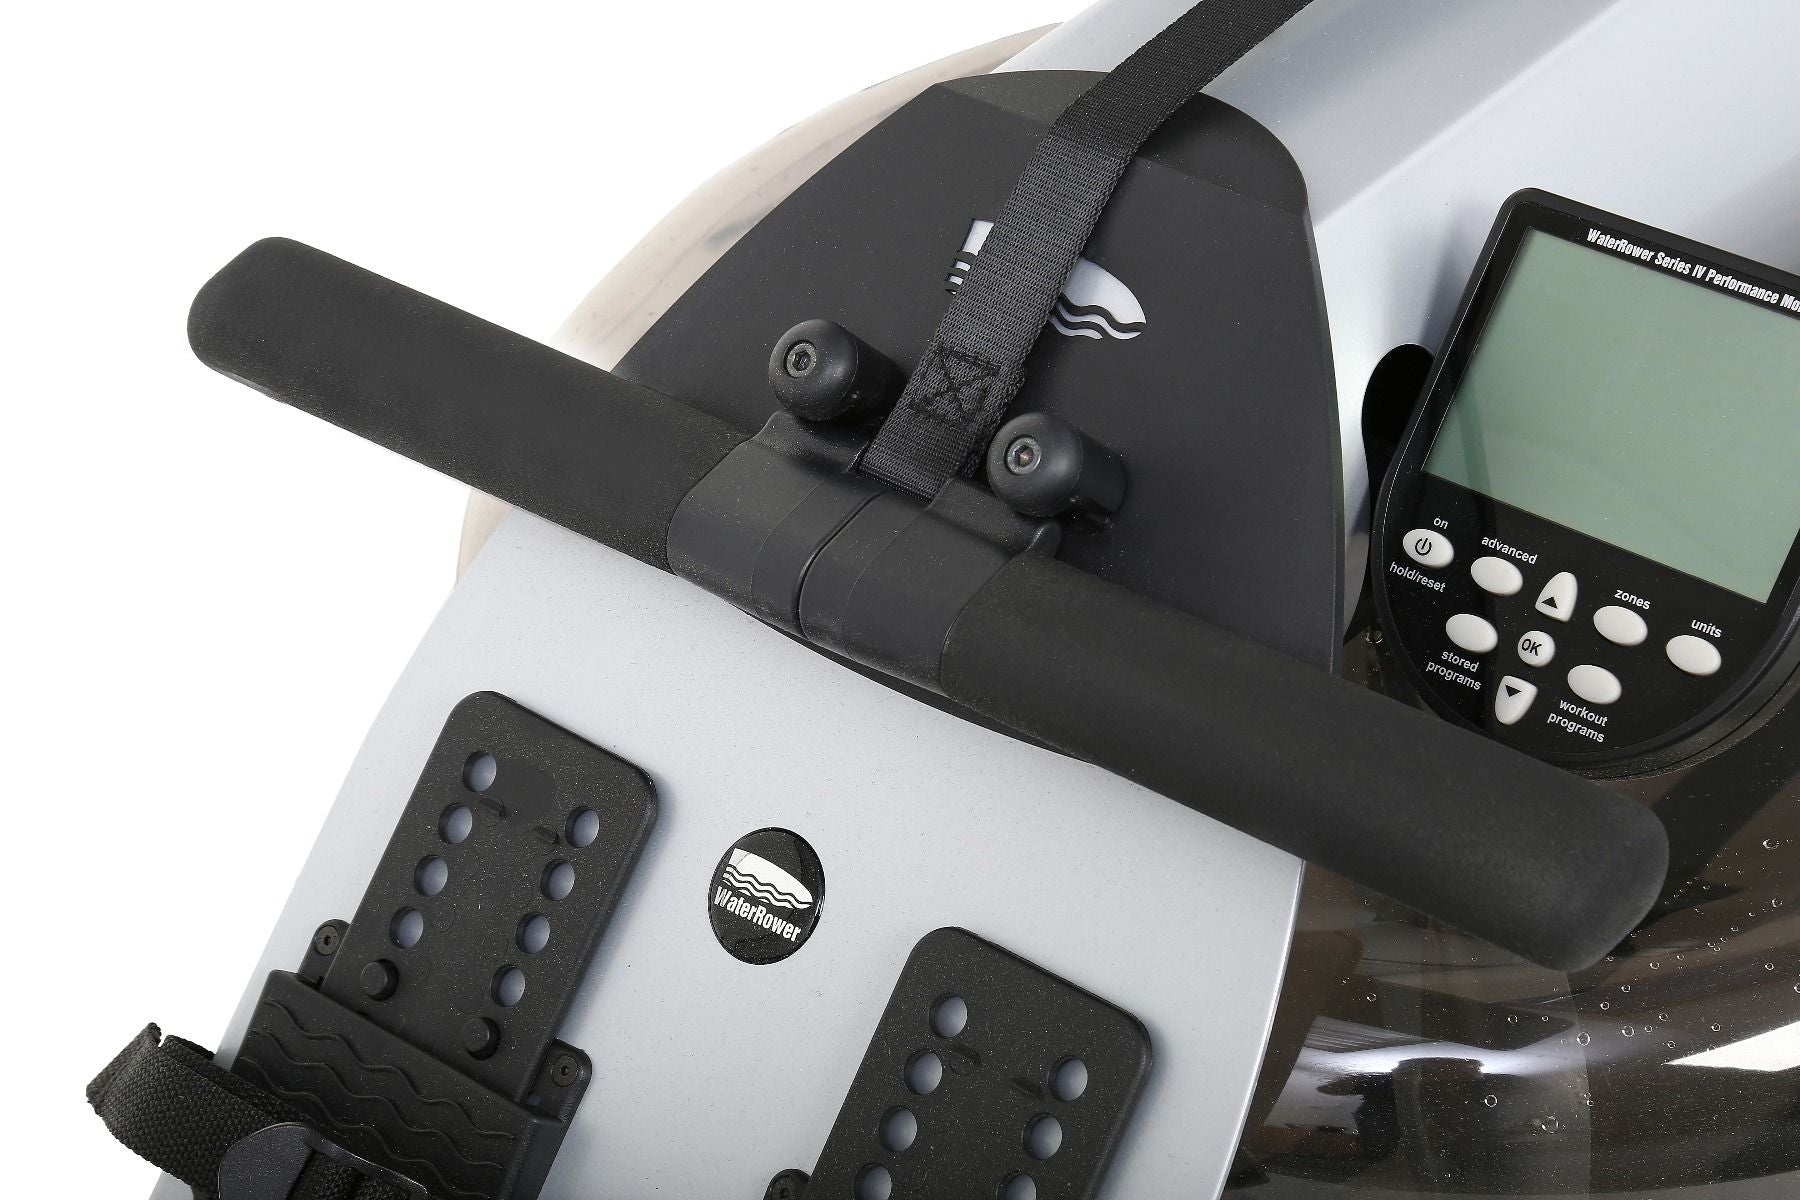 WaterRower M1 LoRise with S4 Performance Monitor